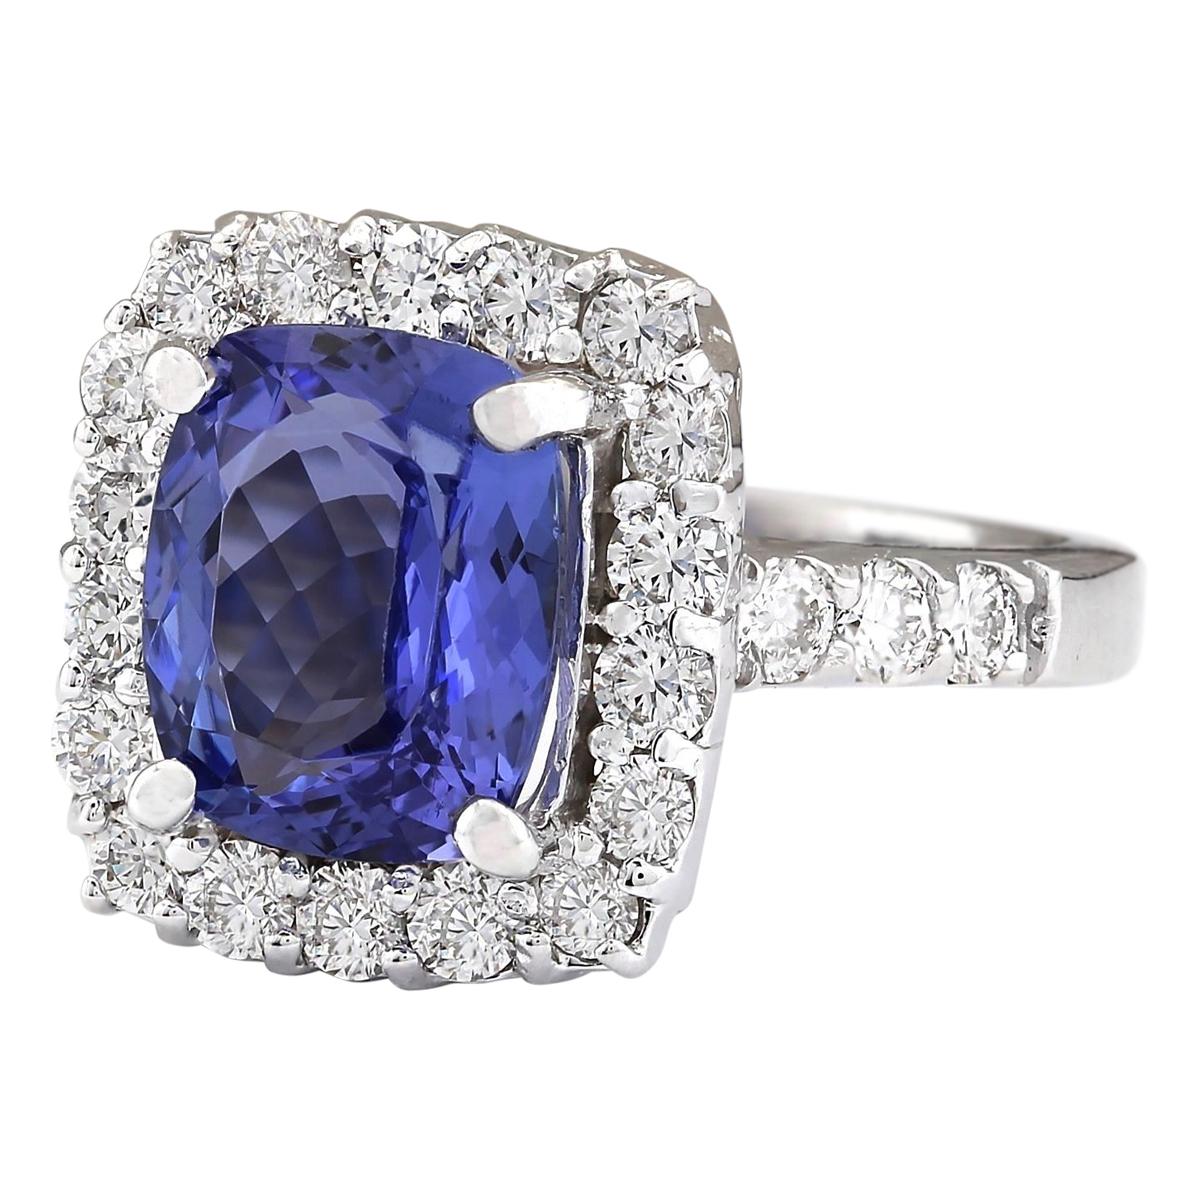 4.95 Carat Natural Tanzanite 14 Karat White Gold Diamond Ring
Stamped: 14K White Gold
Total Ring Weight: 7.3 Grams
Tanzanite Weight is 3.75 Carat (Measures: 10.00x8.00 mm)
Diamond Weight is 1.20 Carat
Color: F-G, Clarity: VS2-SI1
Face Measures: